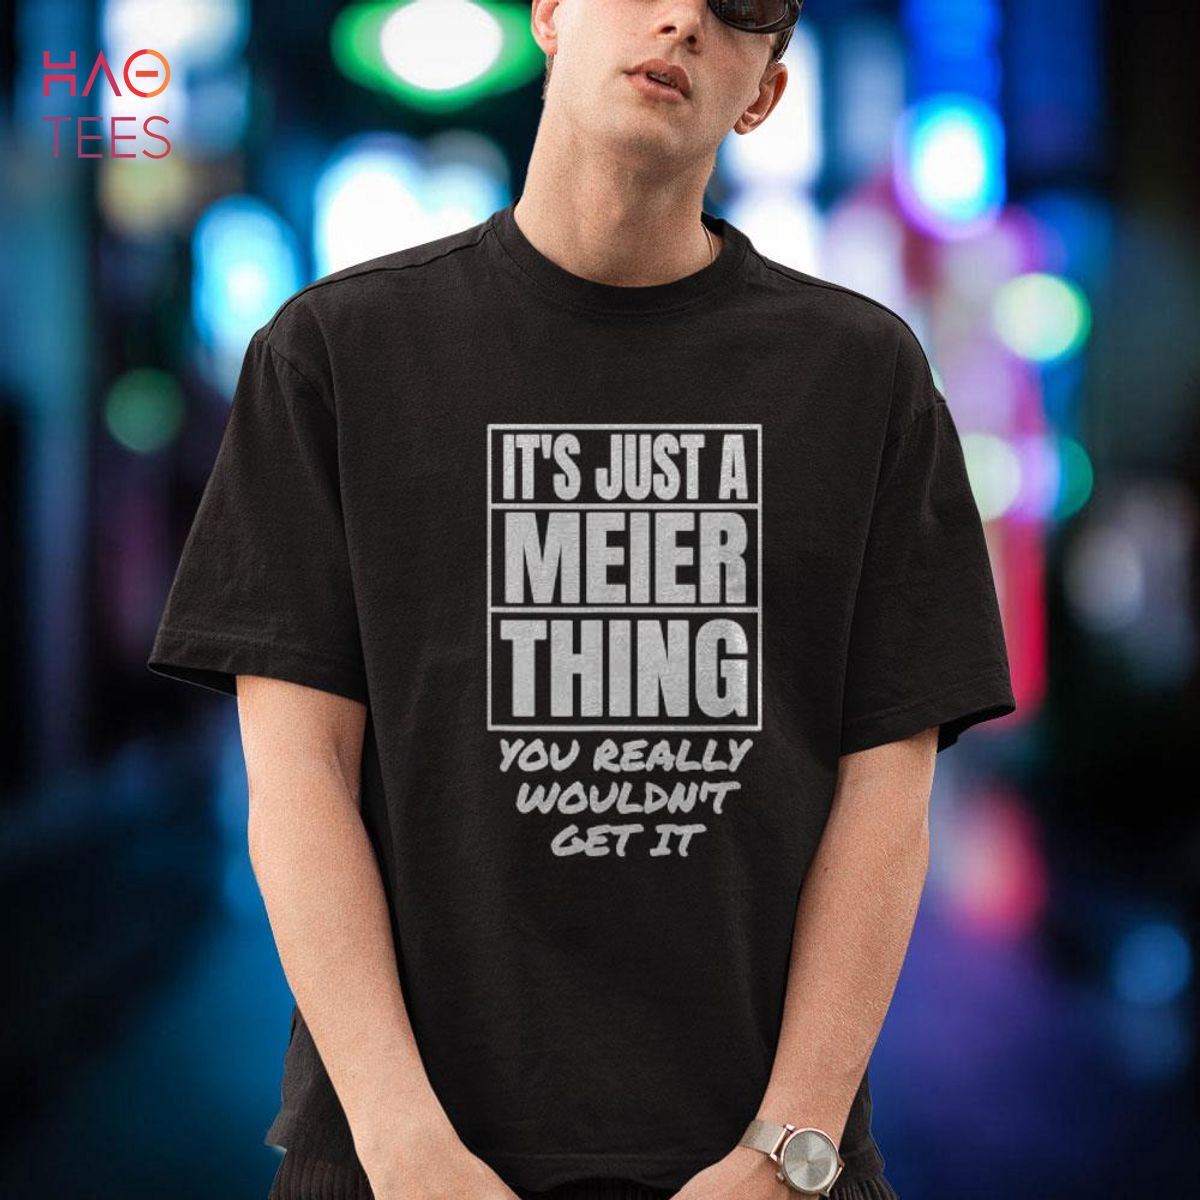 It's Just A Meier Thing You Really Wouldn't Get It Shirt